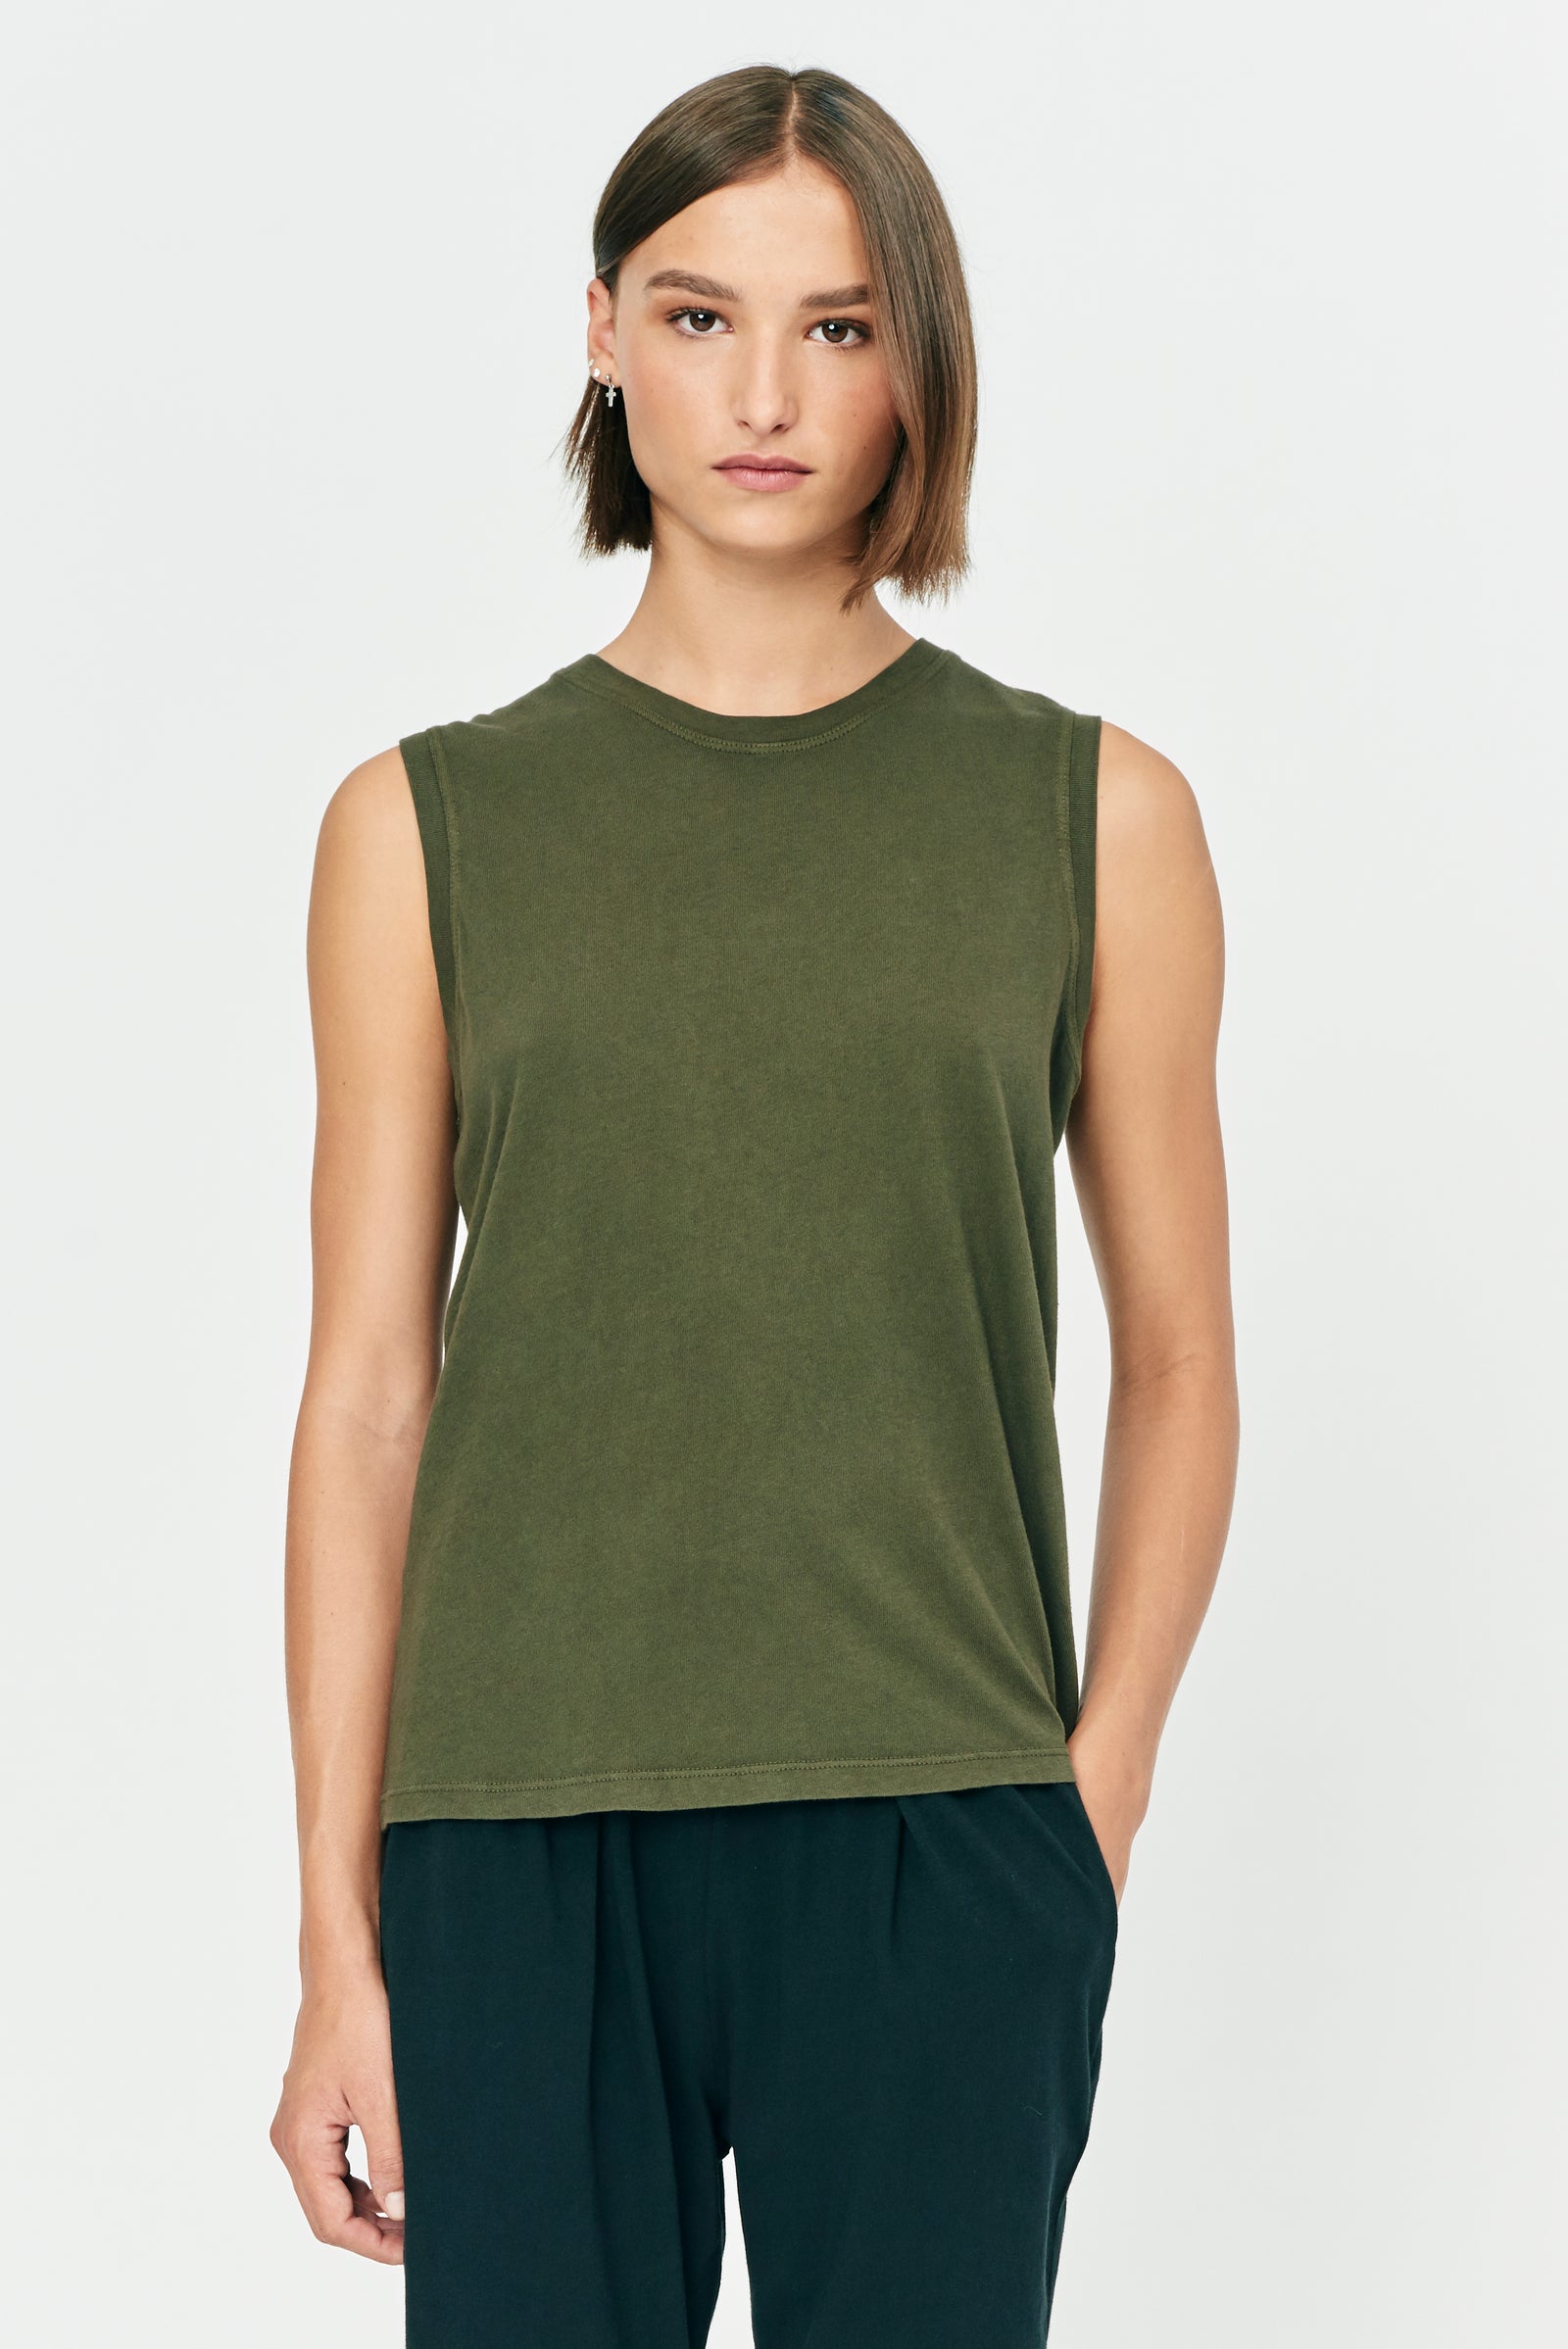 Sage Brush Classic Jersey Fitted Muscle Tee Front Close-Up View